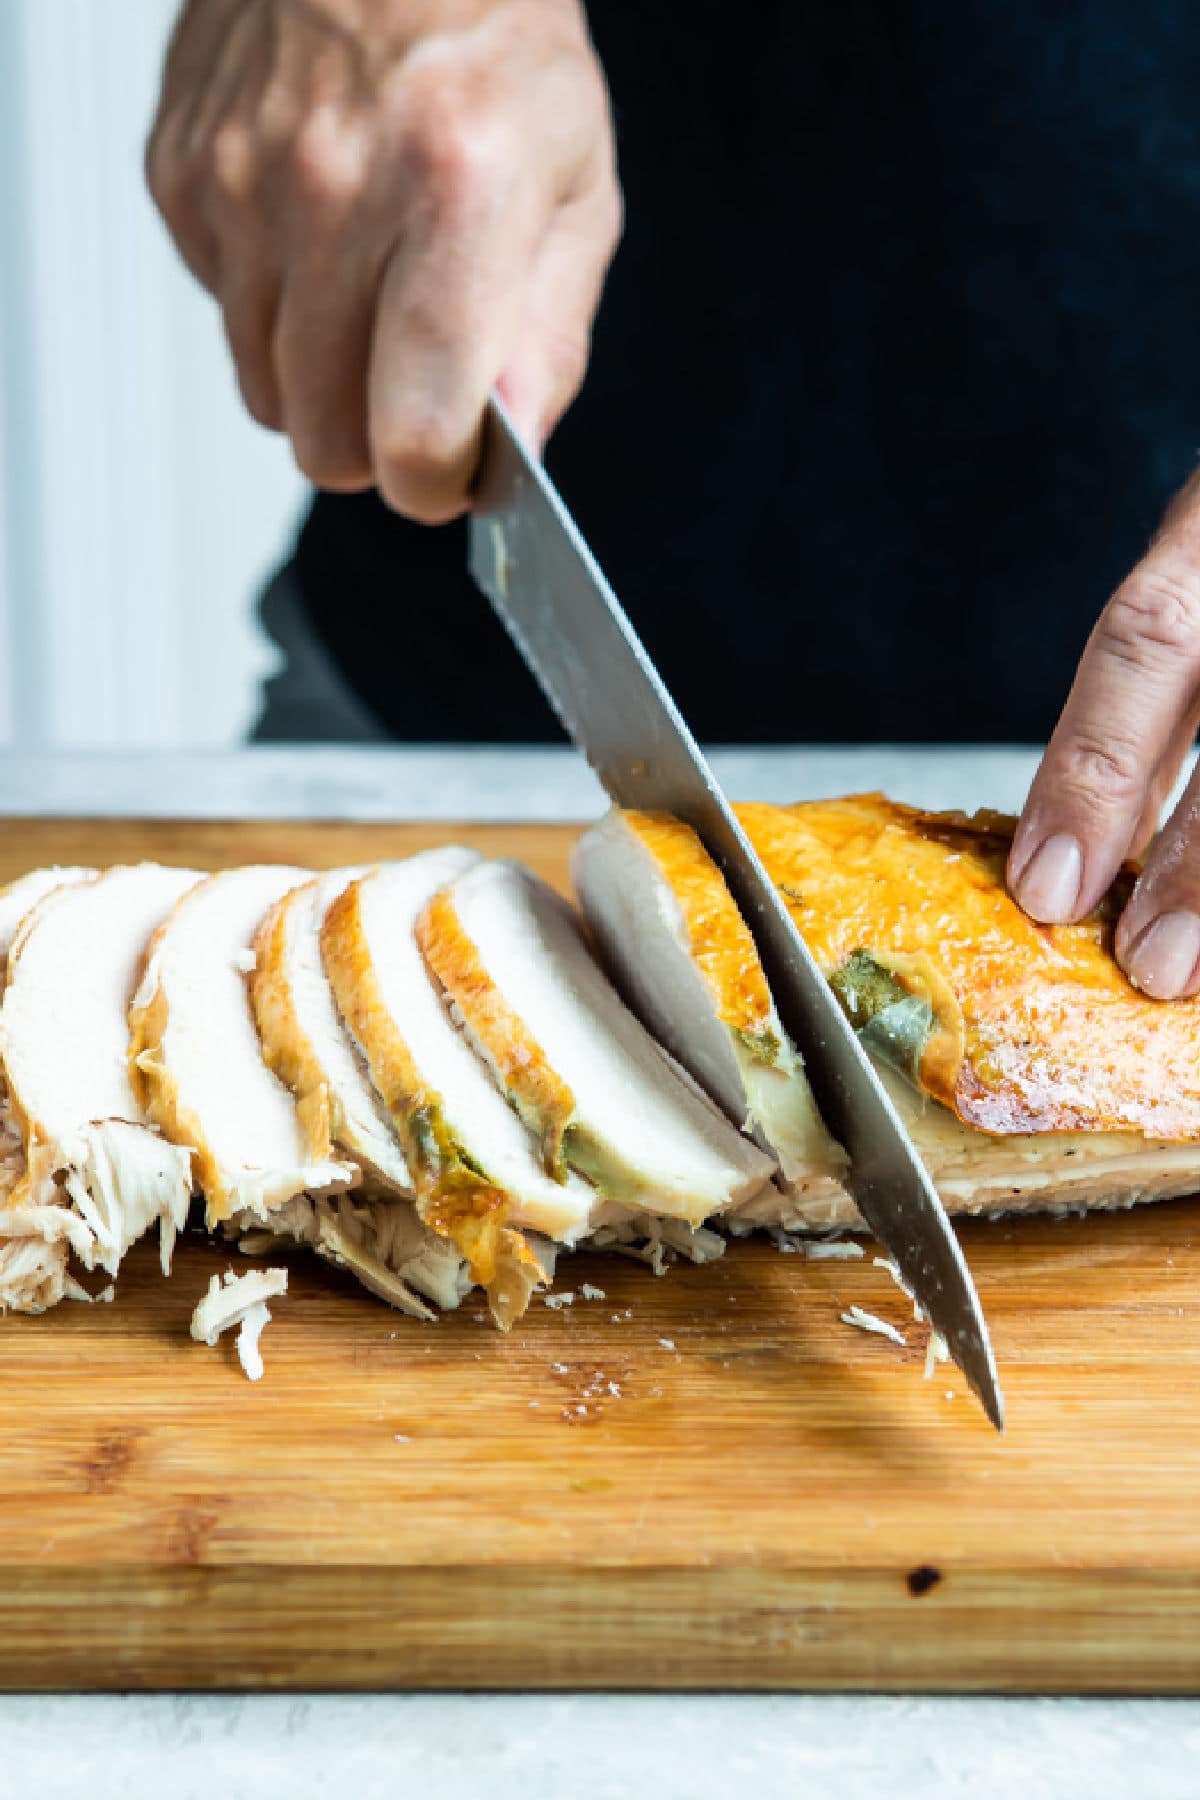 Carving roasted turkey breast into slices.